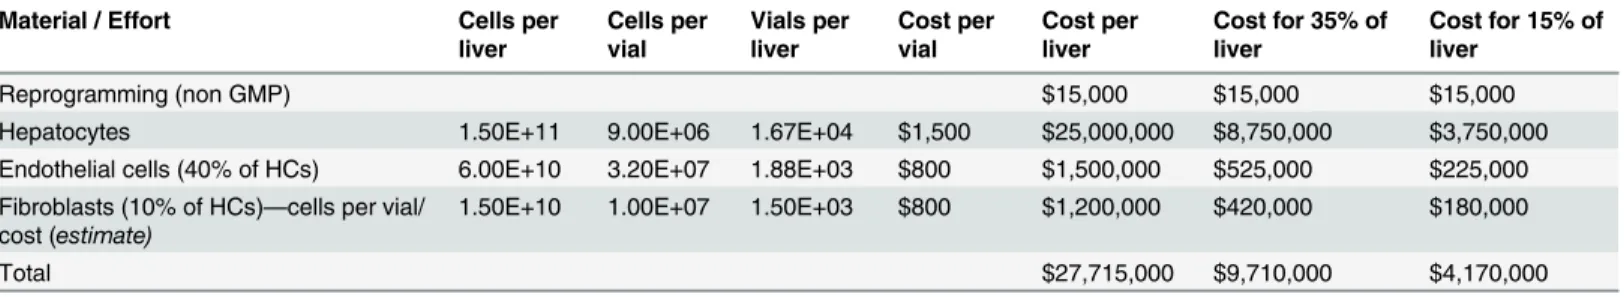 Table 4. Projection of Costs to Manufacture a Liver from iPSCs.